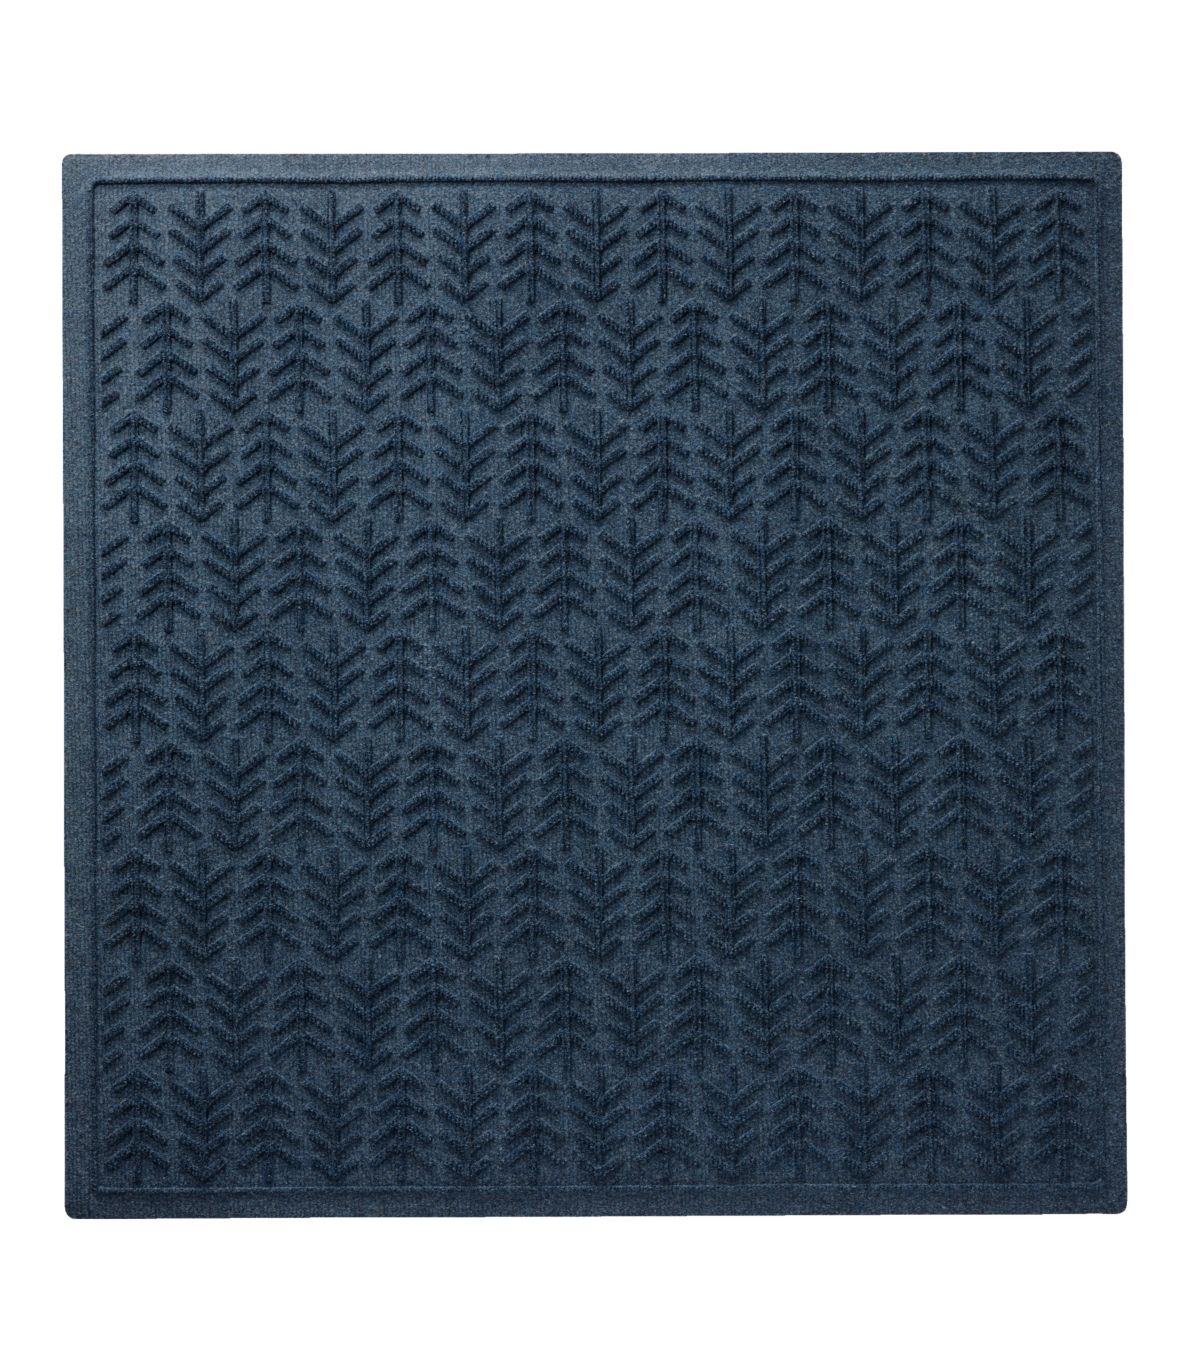 Everyspace Recycled Waterhog Mat, Square, Trees